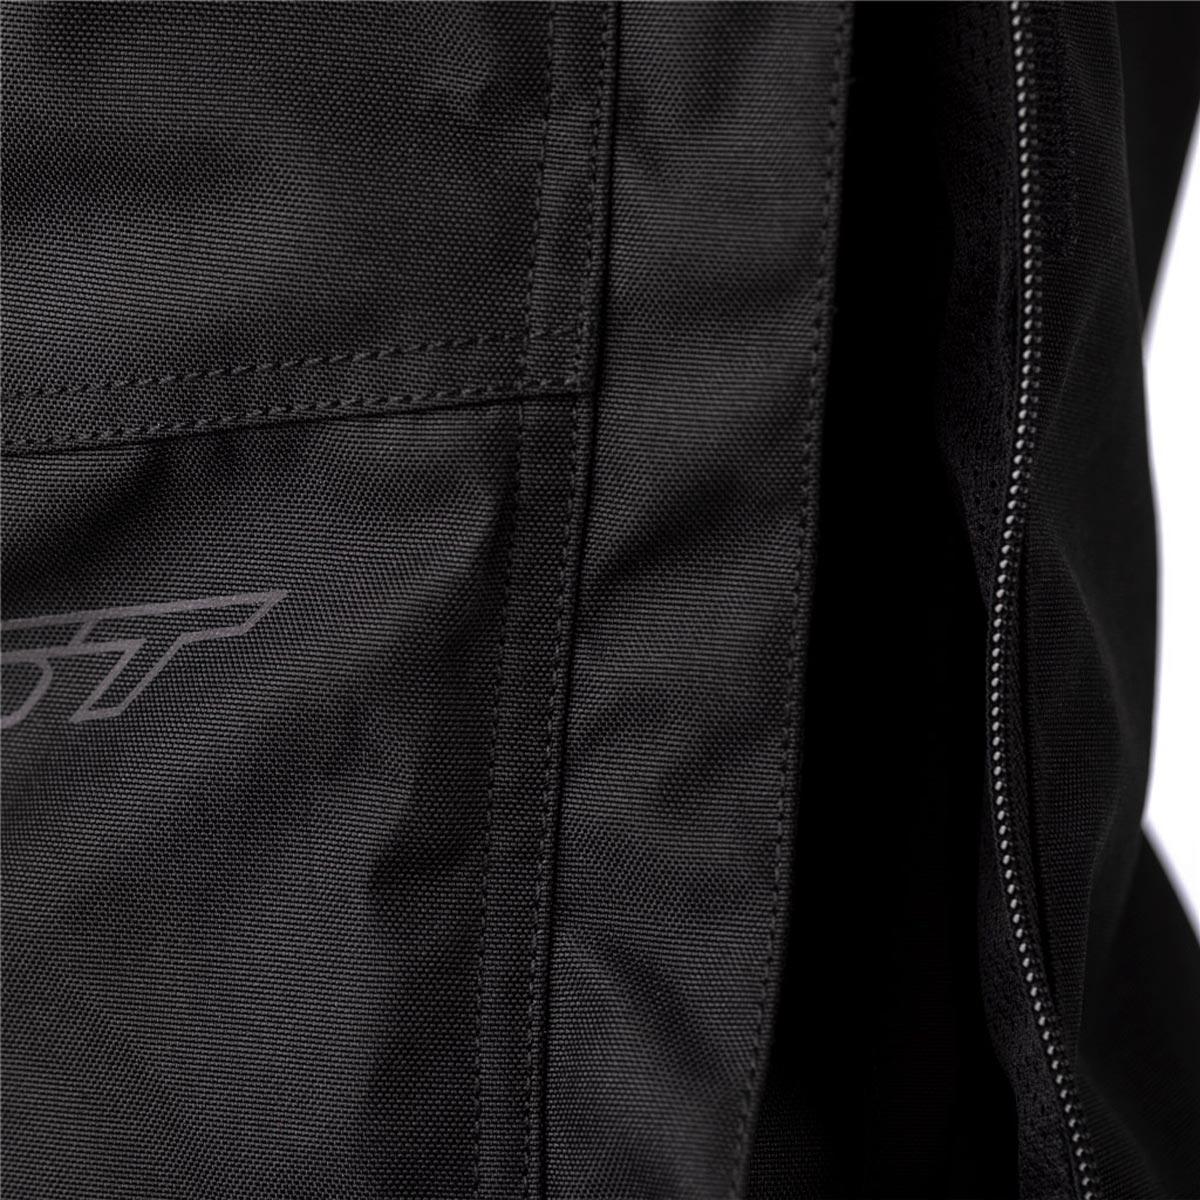 RST City Trousers CE WP  - Motorcycle Overtrousers